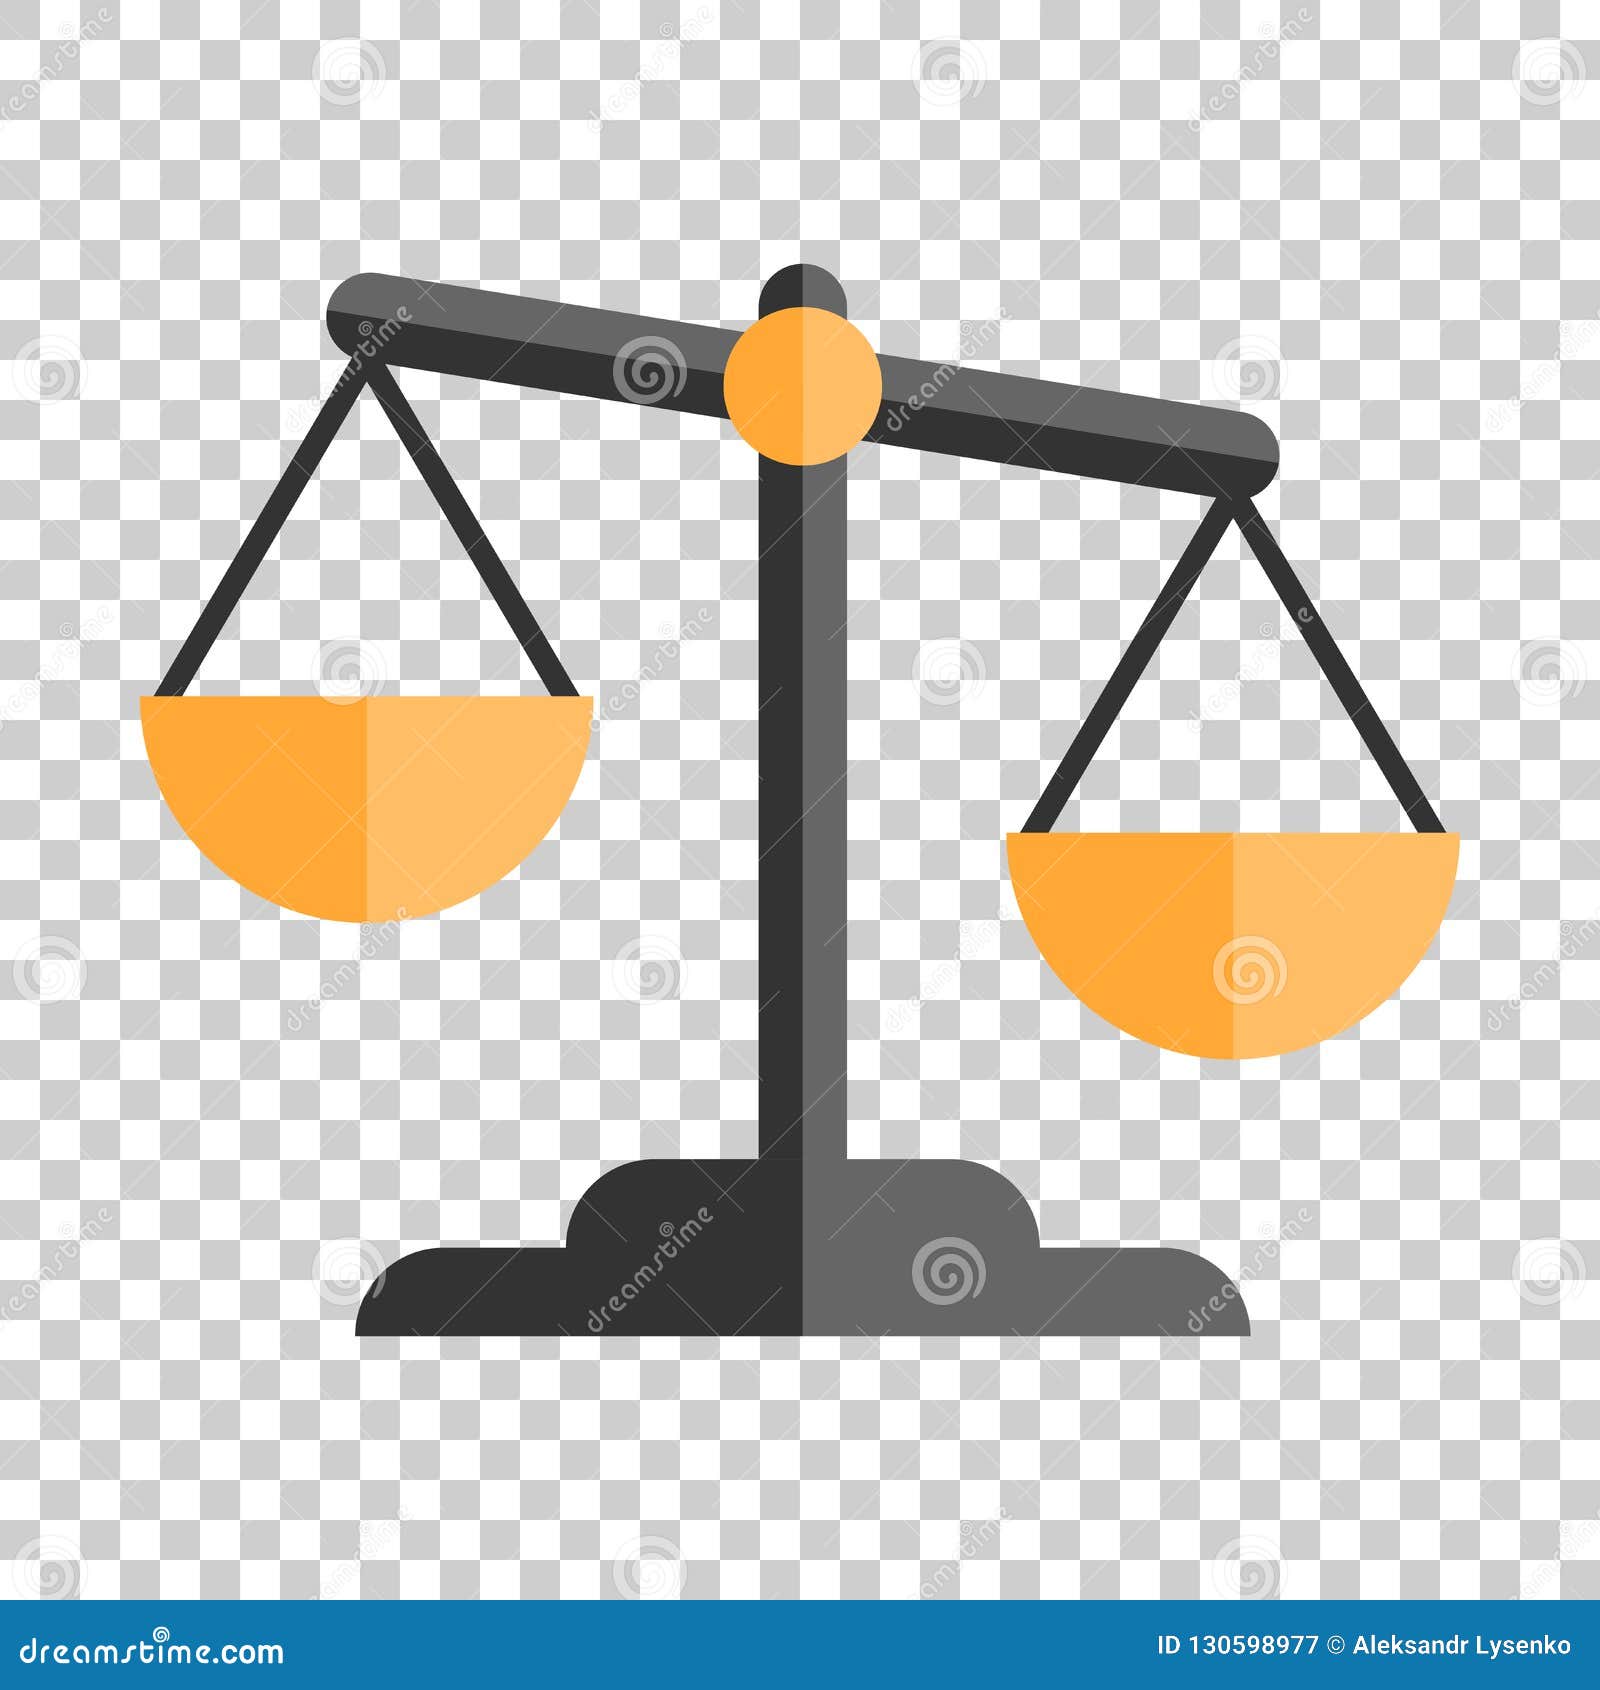 https://thumbs.dreamstime.com/z/scale-comparison-icon-flat-style-balance-weight-vector-illus-illustration-isolated-background-compare-business-concept-130598977.jpg